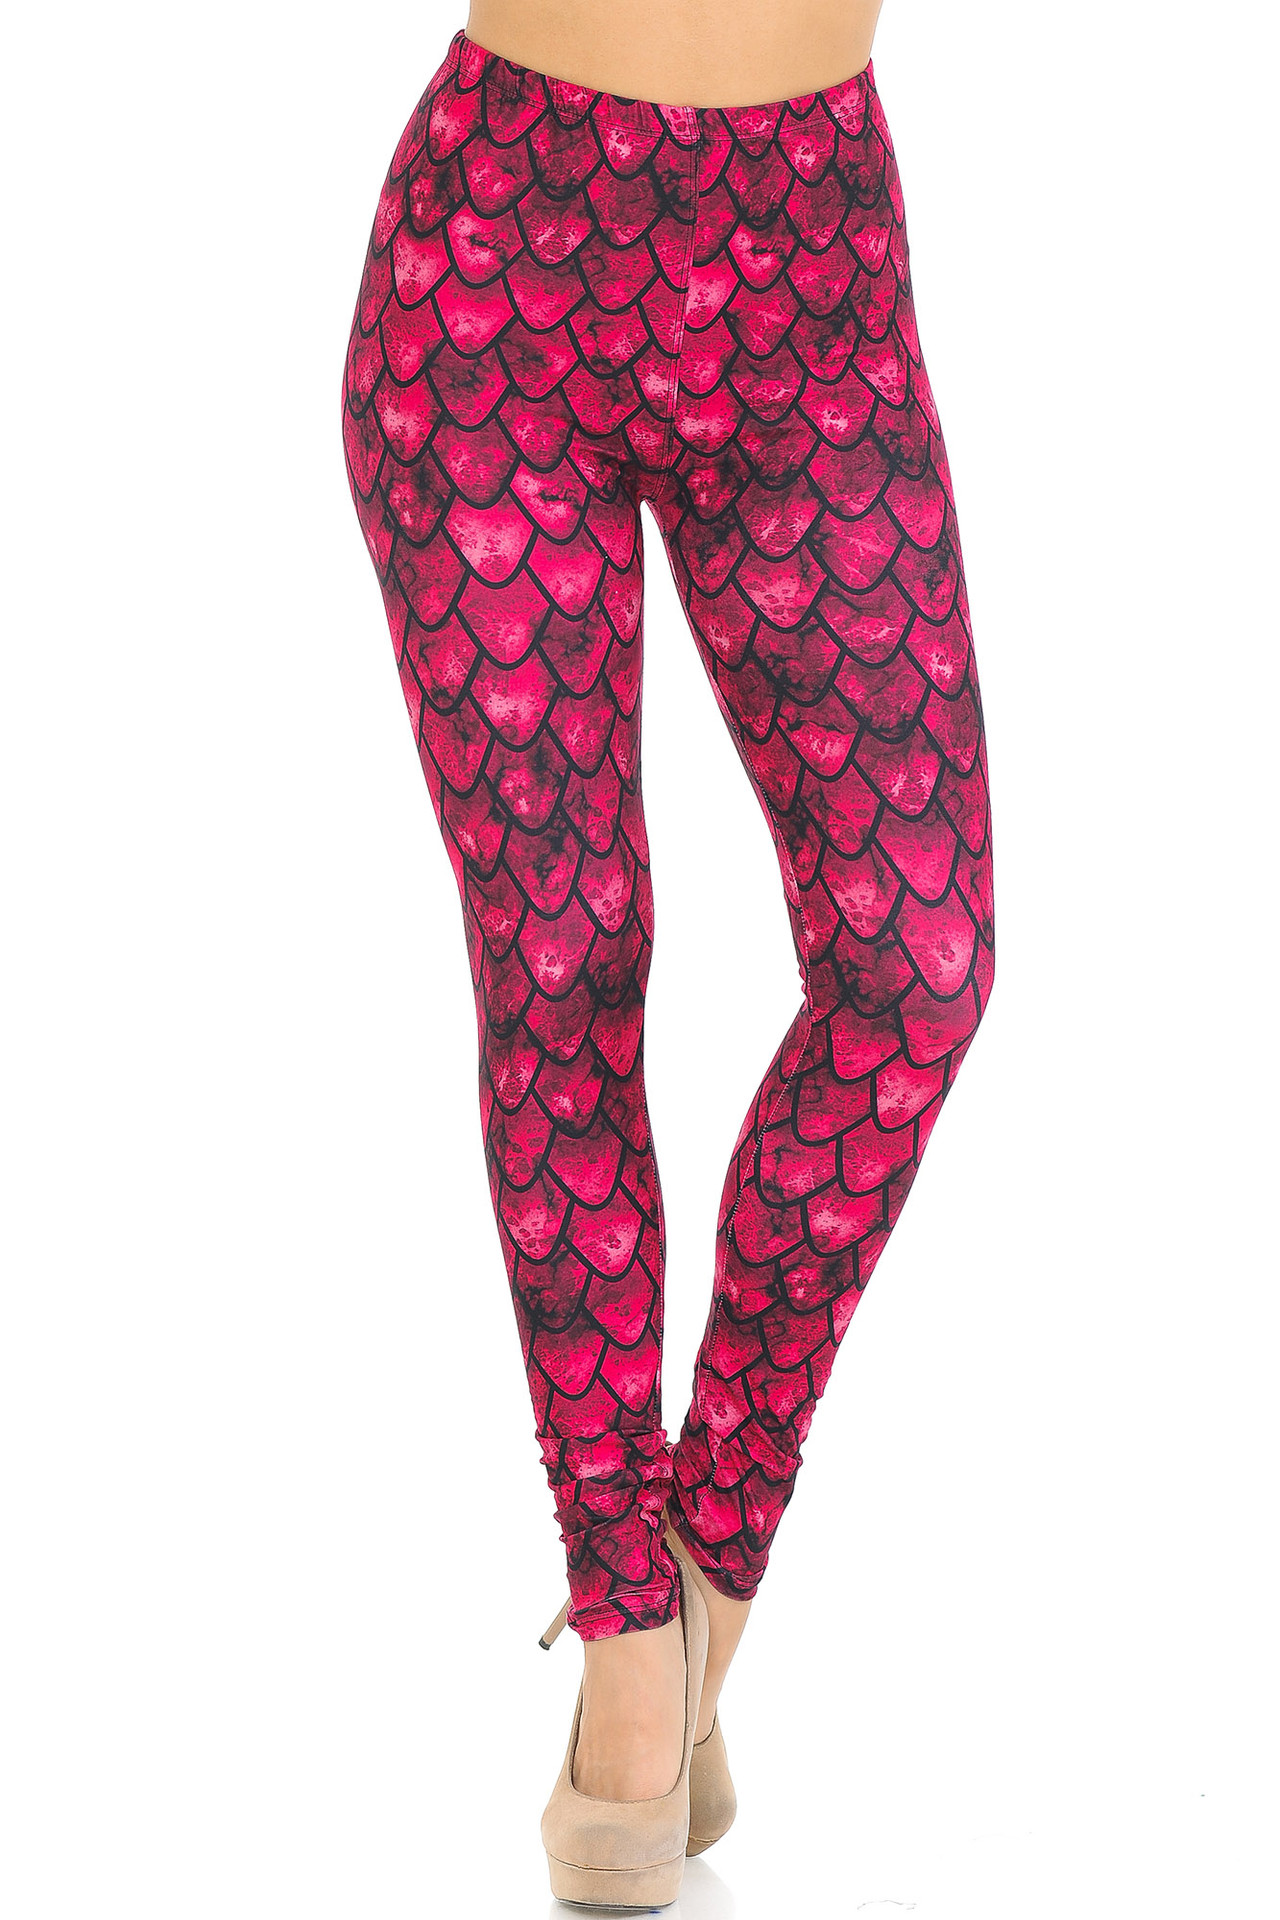 Creamy Soft Red Scale Extra Small Leggings - USA Fashion™